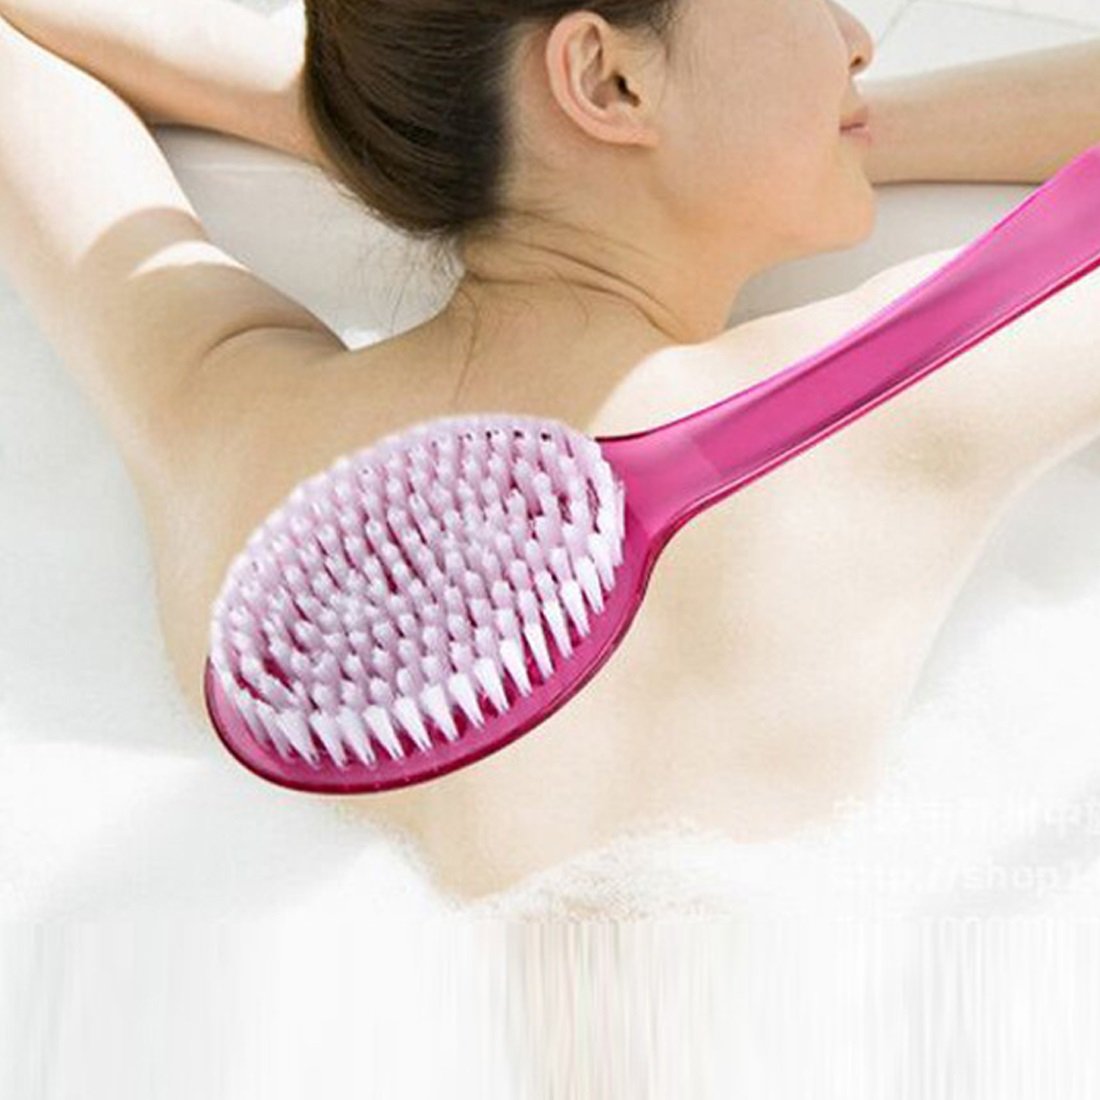 Tarrant Long-Handle Bath/Shower Body Brush and Back Scrubber with Hard Bristles for Deep Skin Cleansing and Exfoliating - Pink